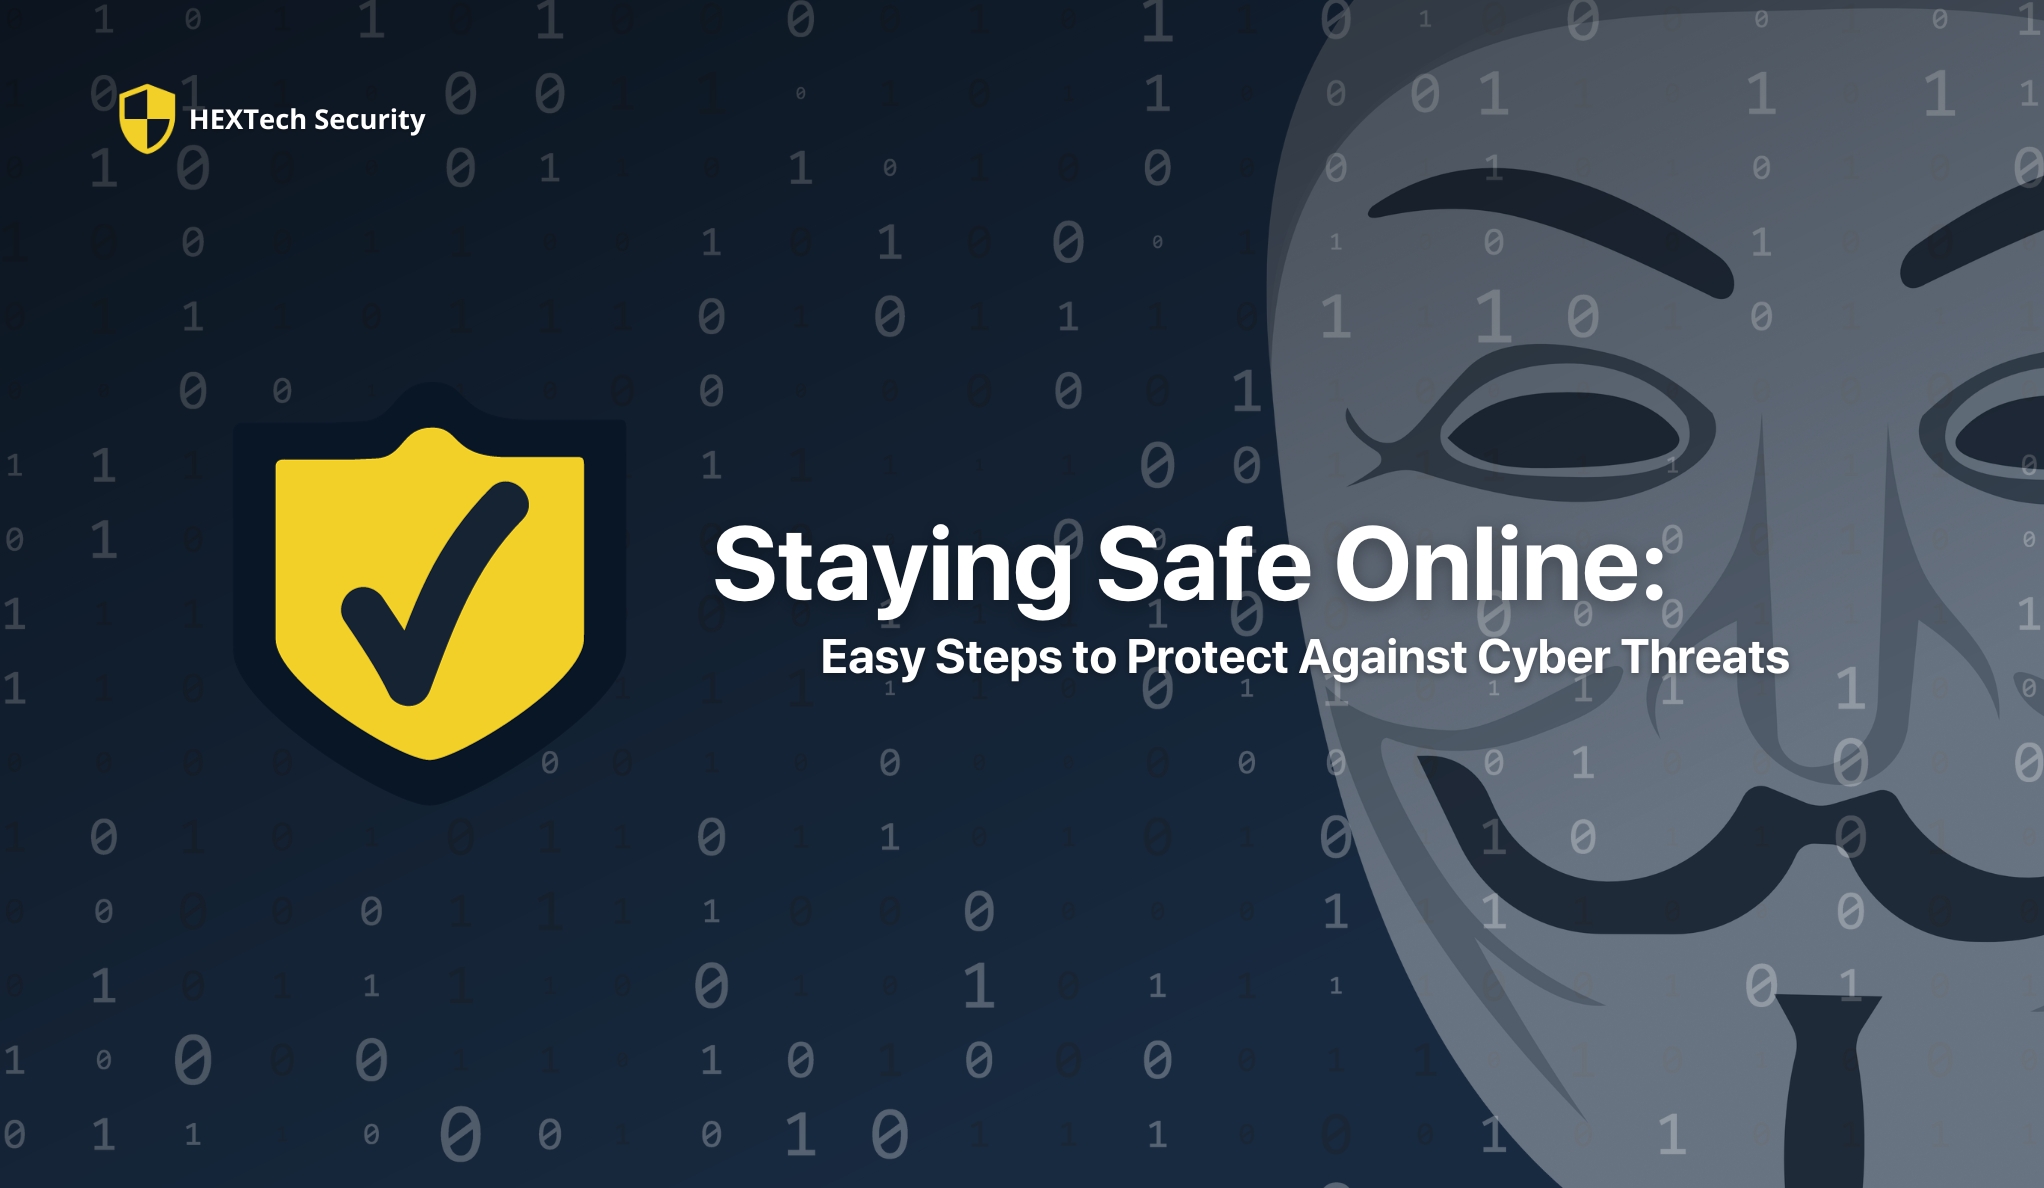 Staying Safe Online Easy Steps to Protect Against Cyber Threats